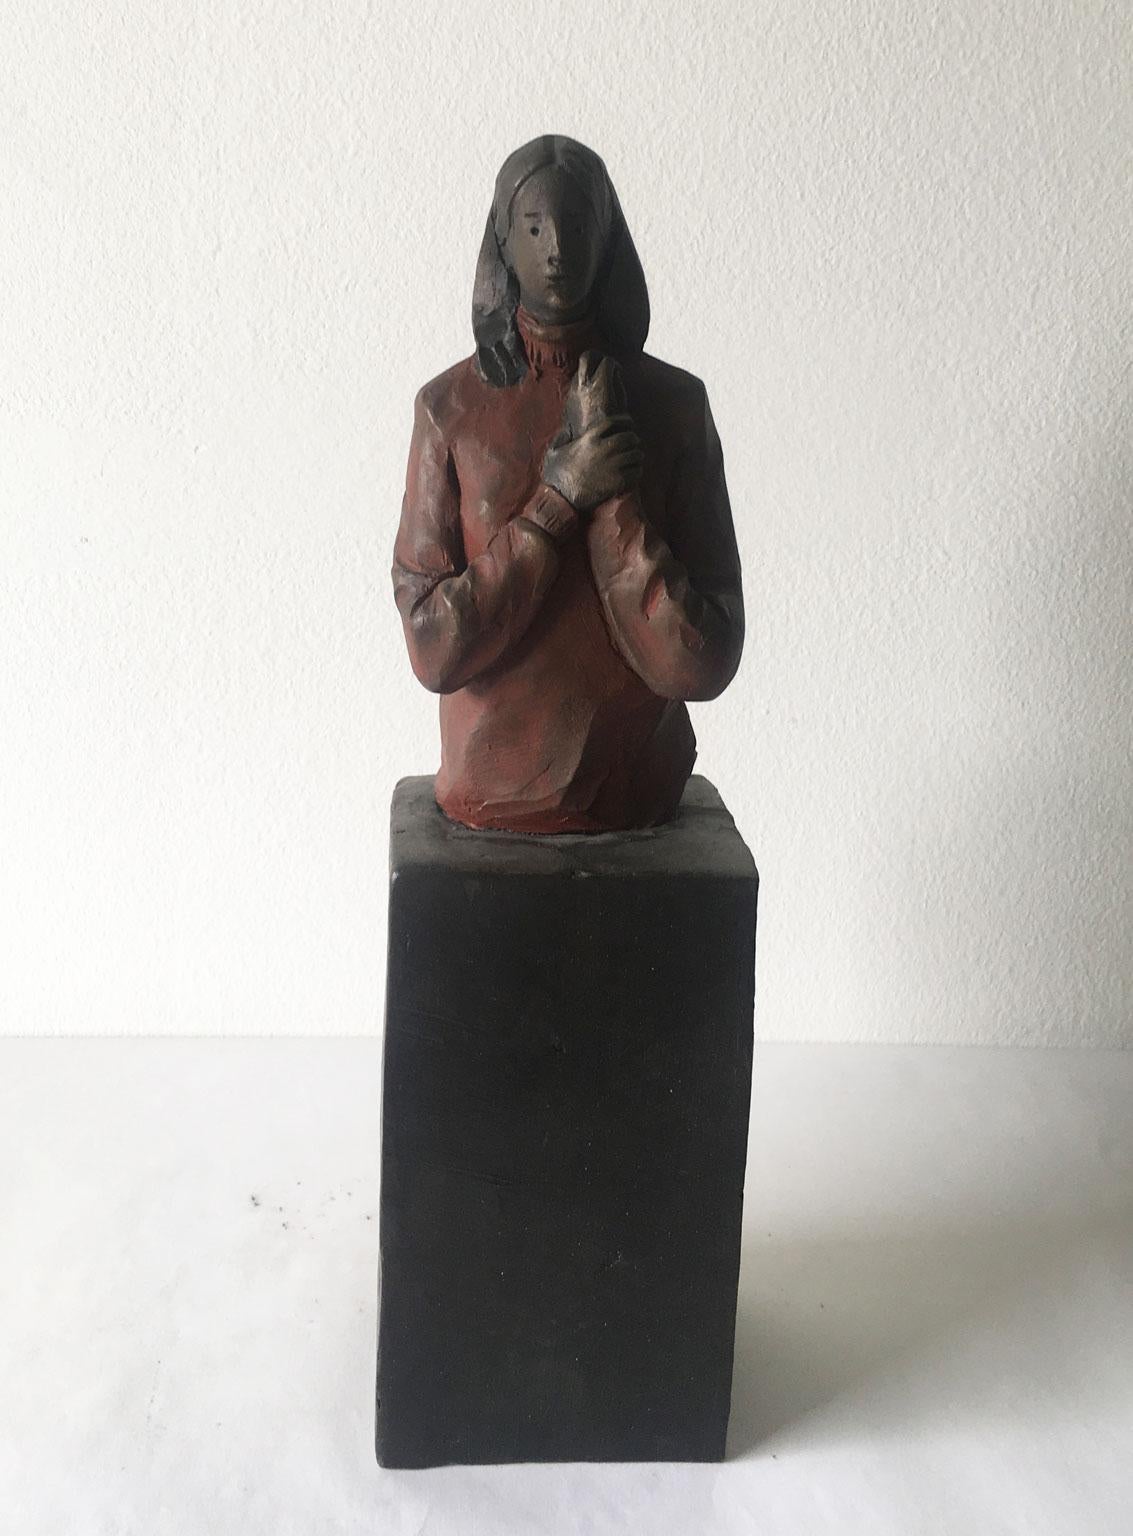 This intense bronze sculpture was made by the well known Italian artist, Aron Demetz, in 2004, Italy.
This is a lost wax bronze hand painted. The title is 